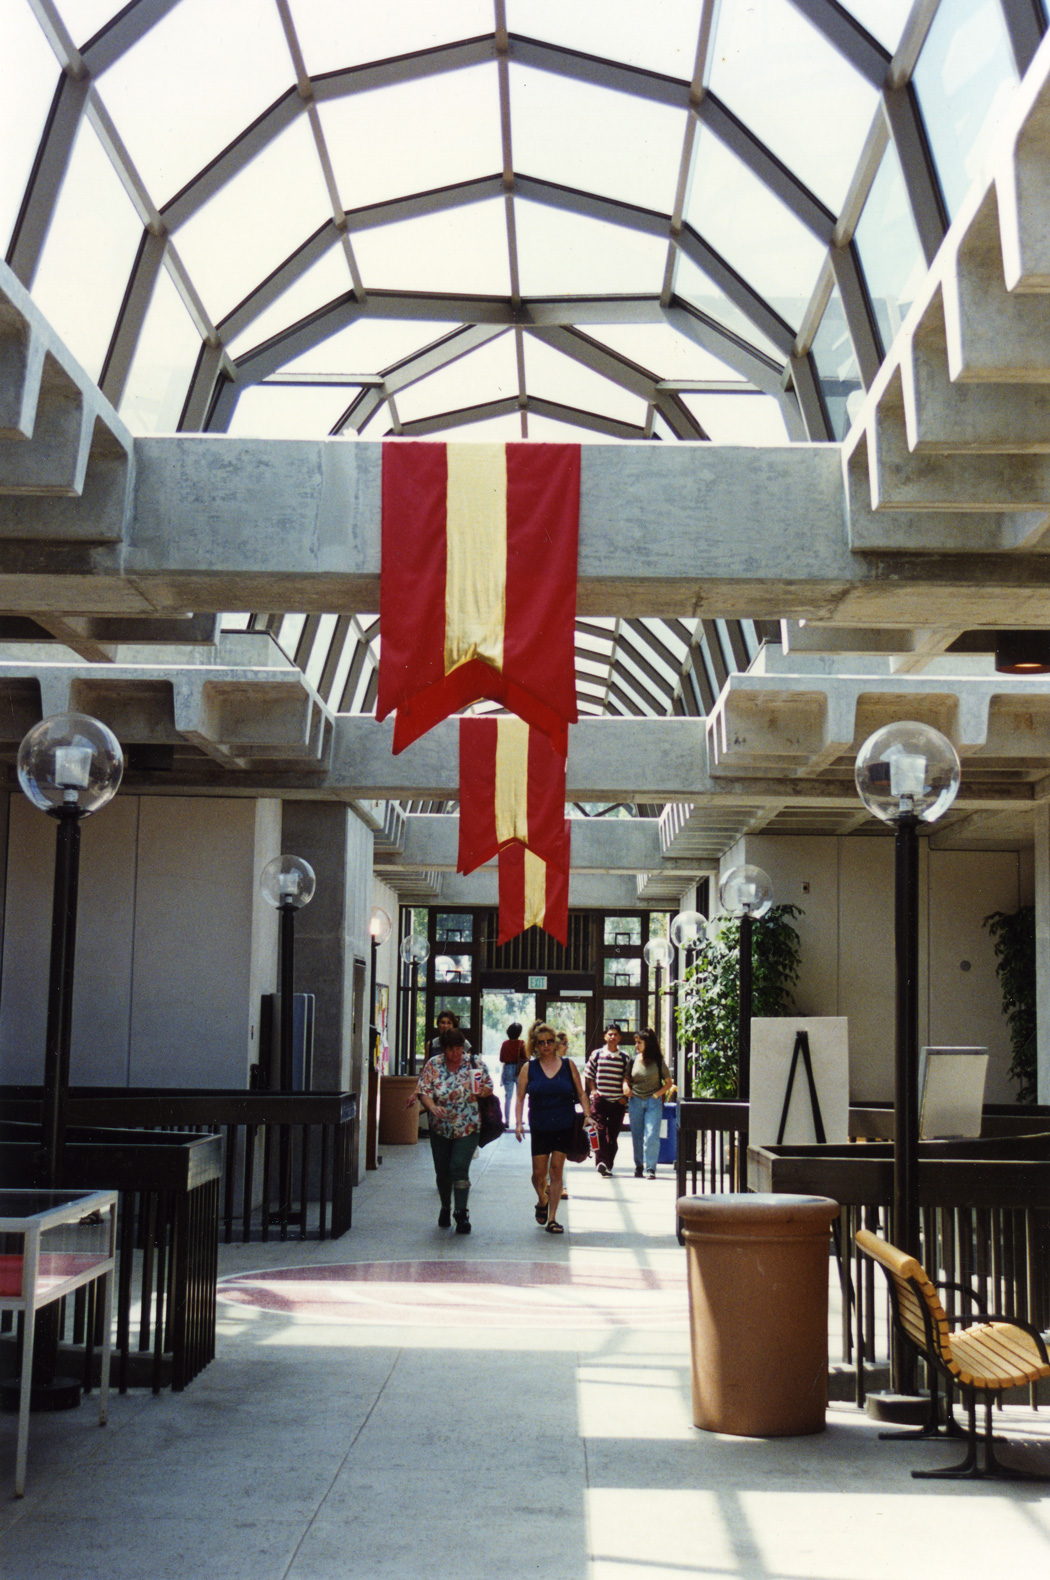 Loker Student Union arch and aisleway, ca. 1994